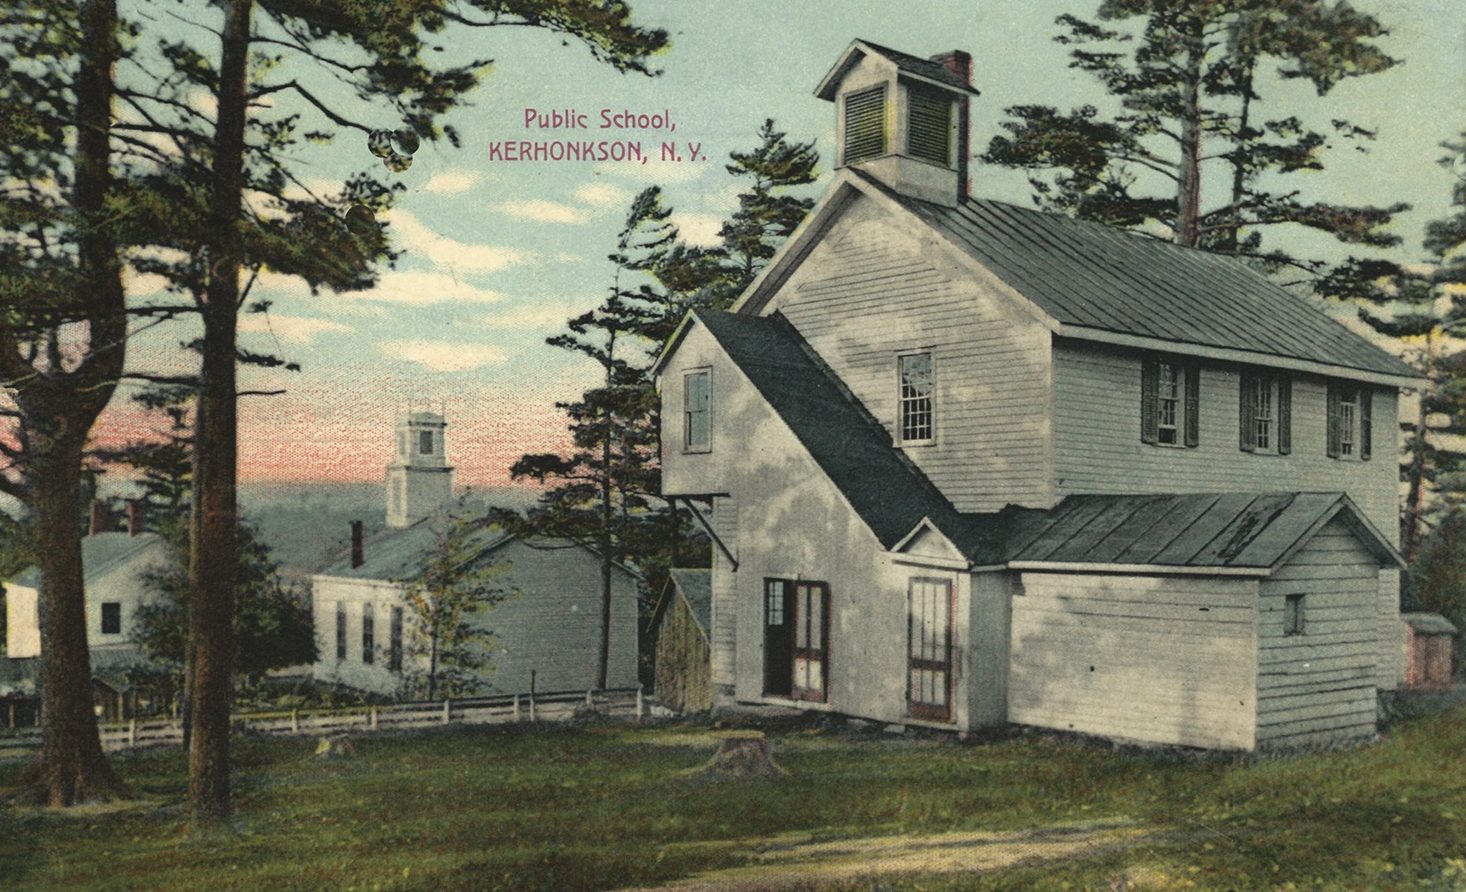 “The Public School, Kerhonkson, NY,” postcard was sent in 1908. The church in the background is the “RD (Reformed Dutch) Church”.